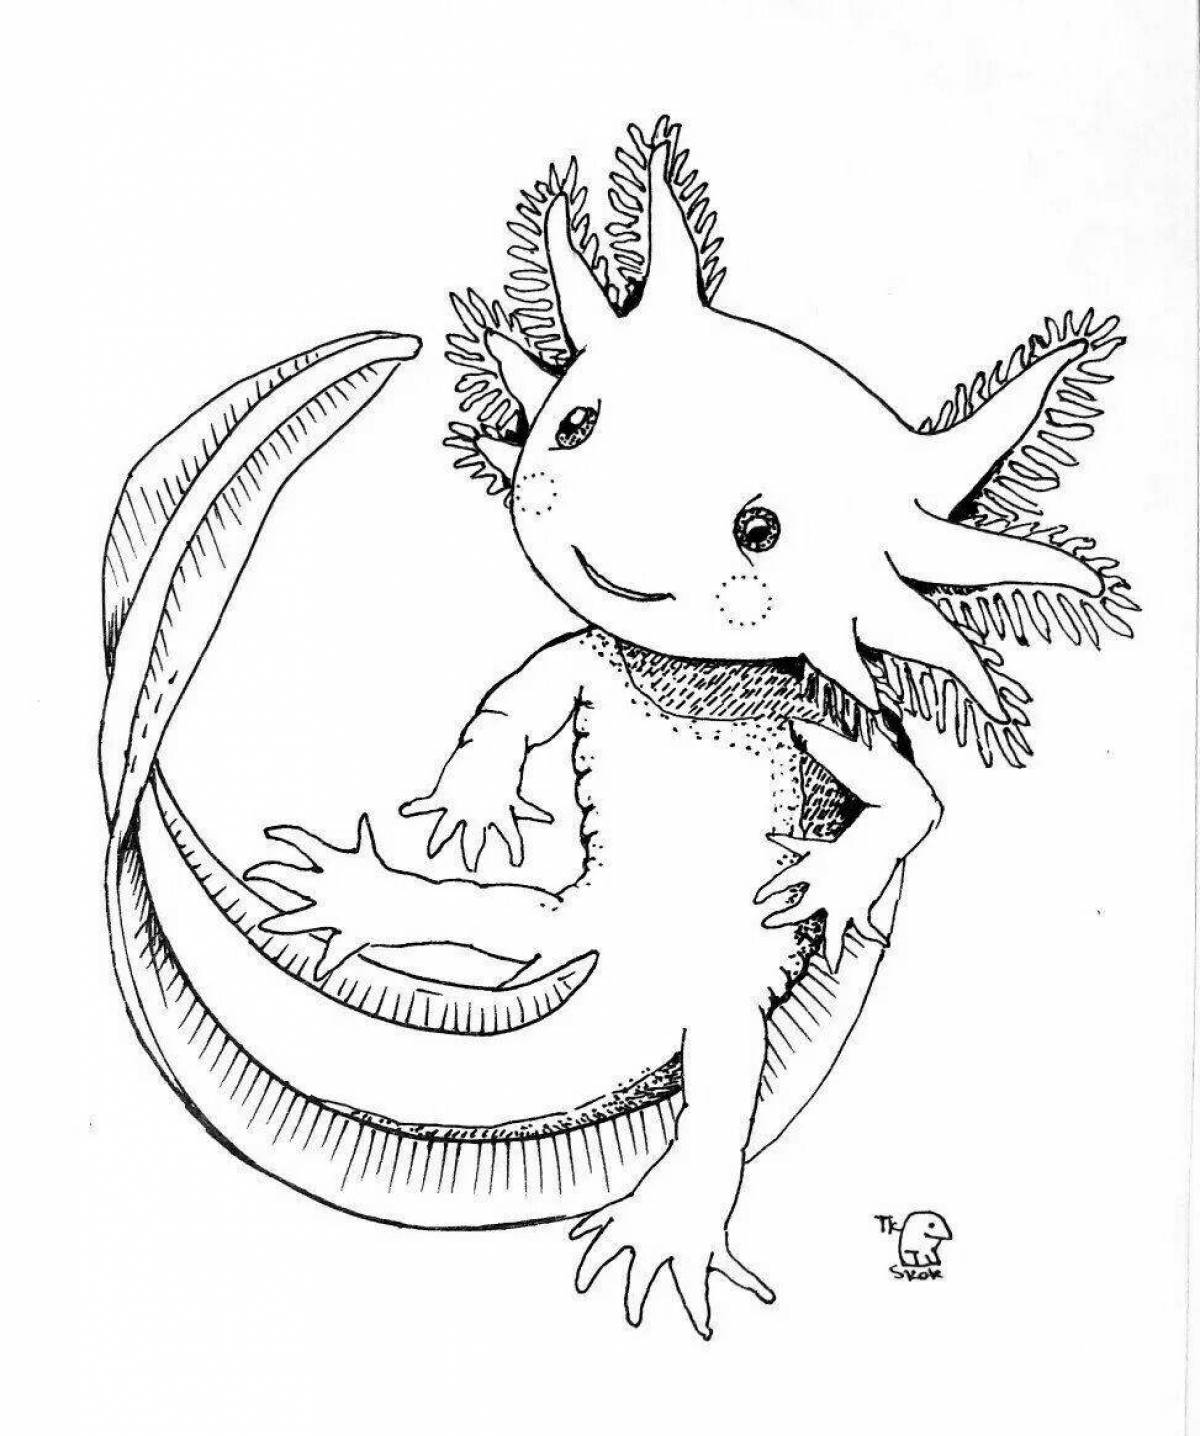 Playful axolotl coloring page for kids